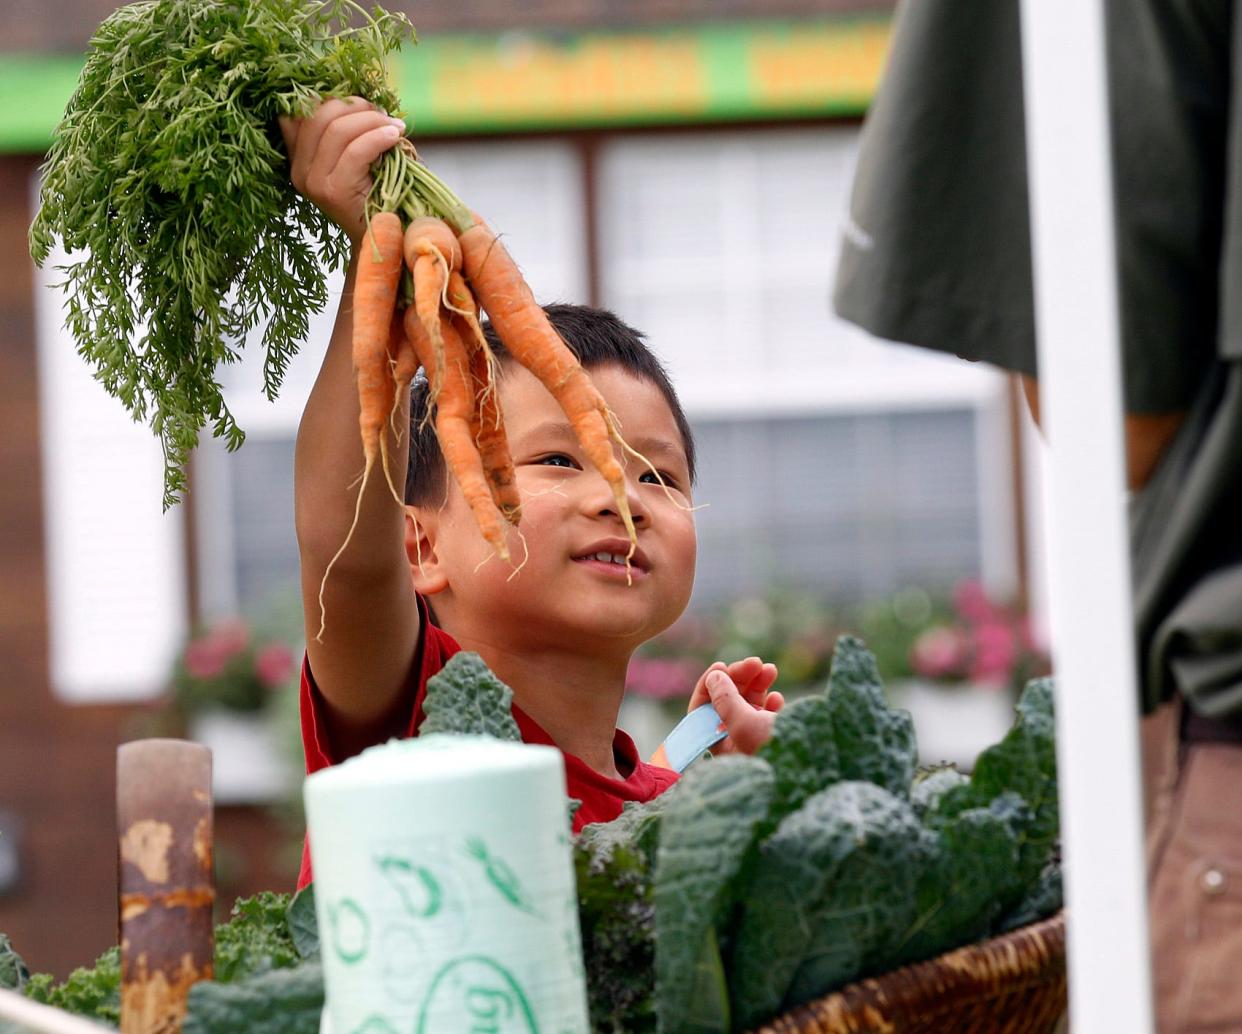 Tucker Connelly, 7, of Southborough, holds up carrots to be bagged as he helps his mother at the Ashland Farmers' Market, June 10, 2021.